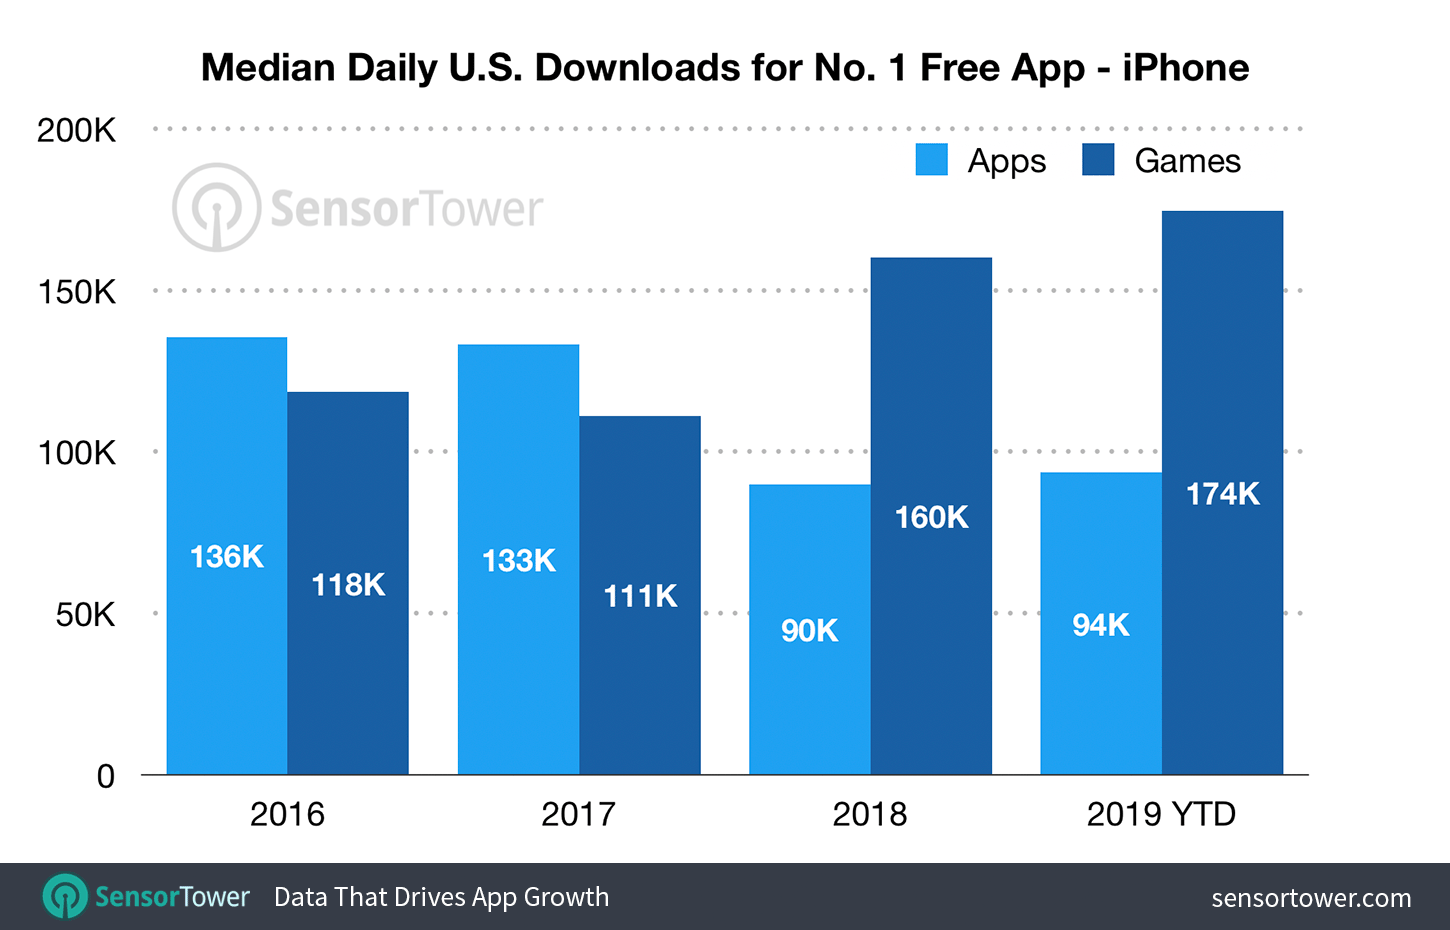 Median Downloads to Reach Number One on the U.S. App Store - First-Half 2019